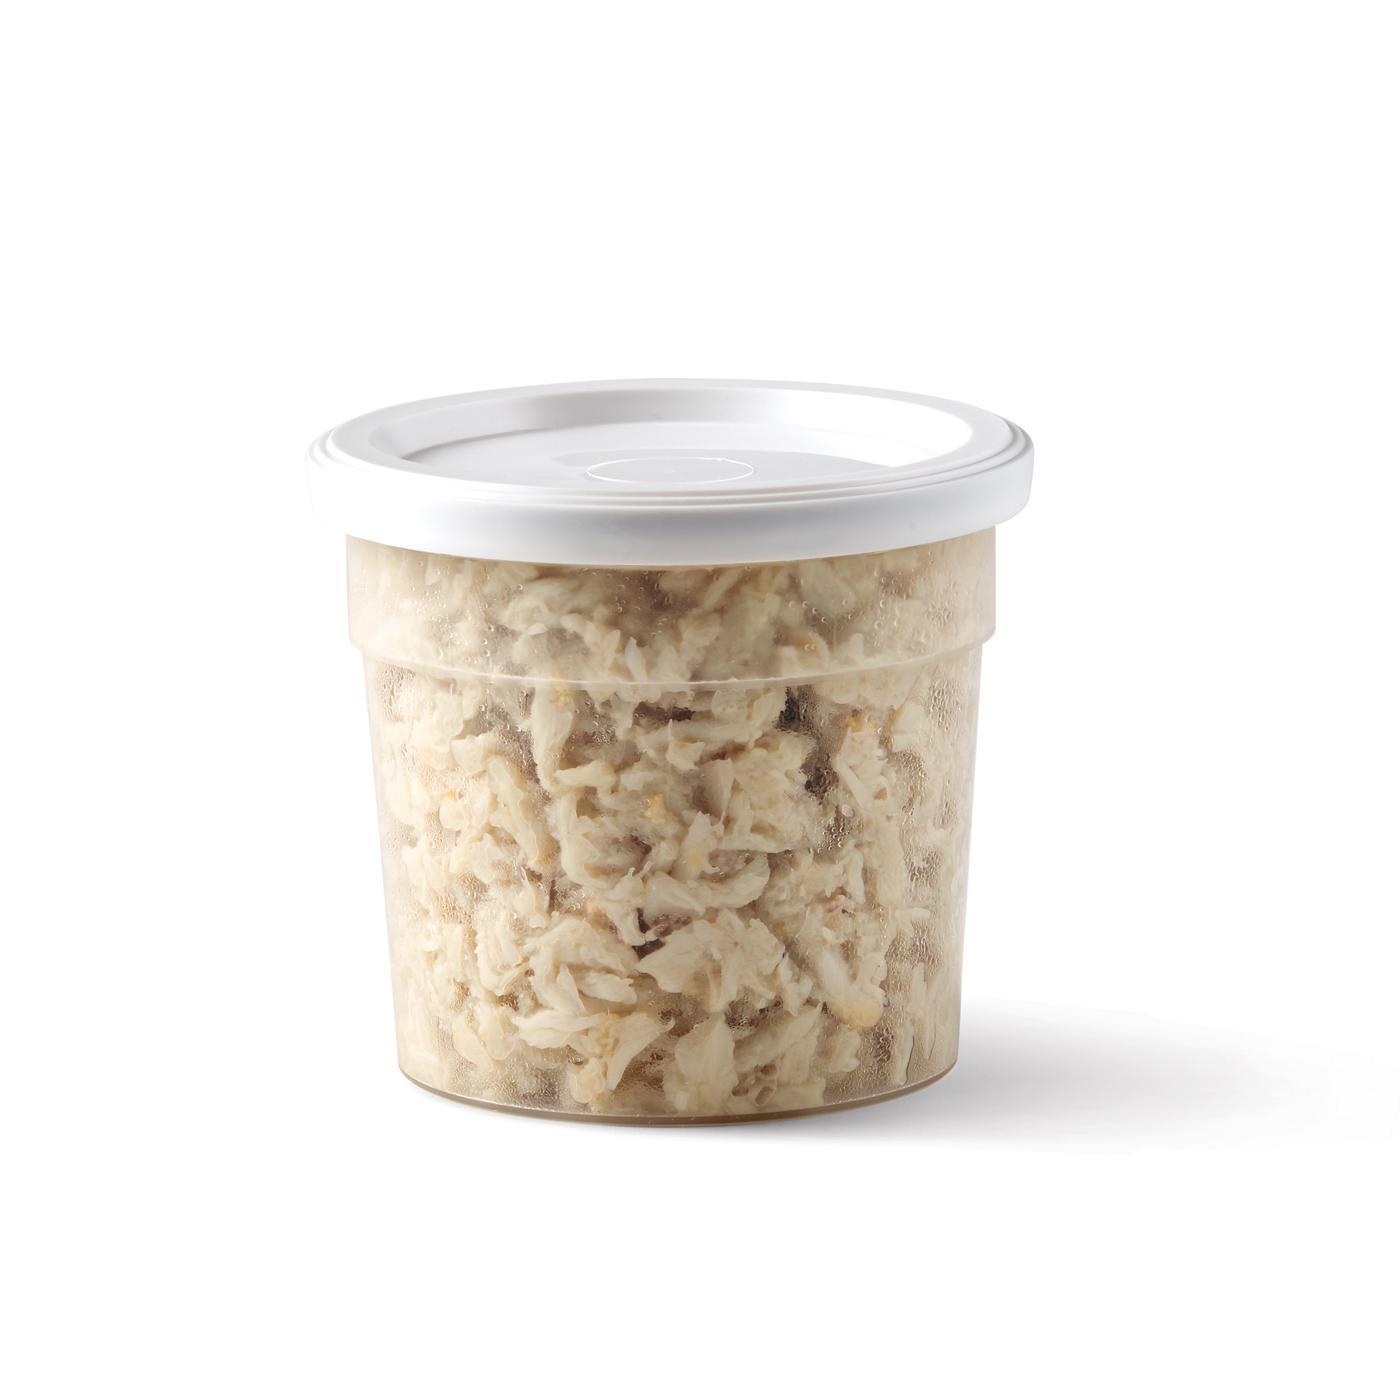 Refrigerated Special Crab Meat; image 1 of 2